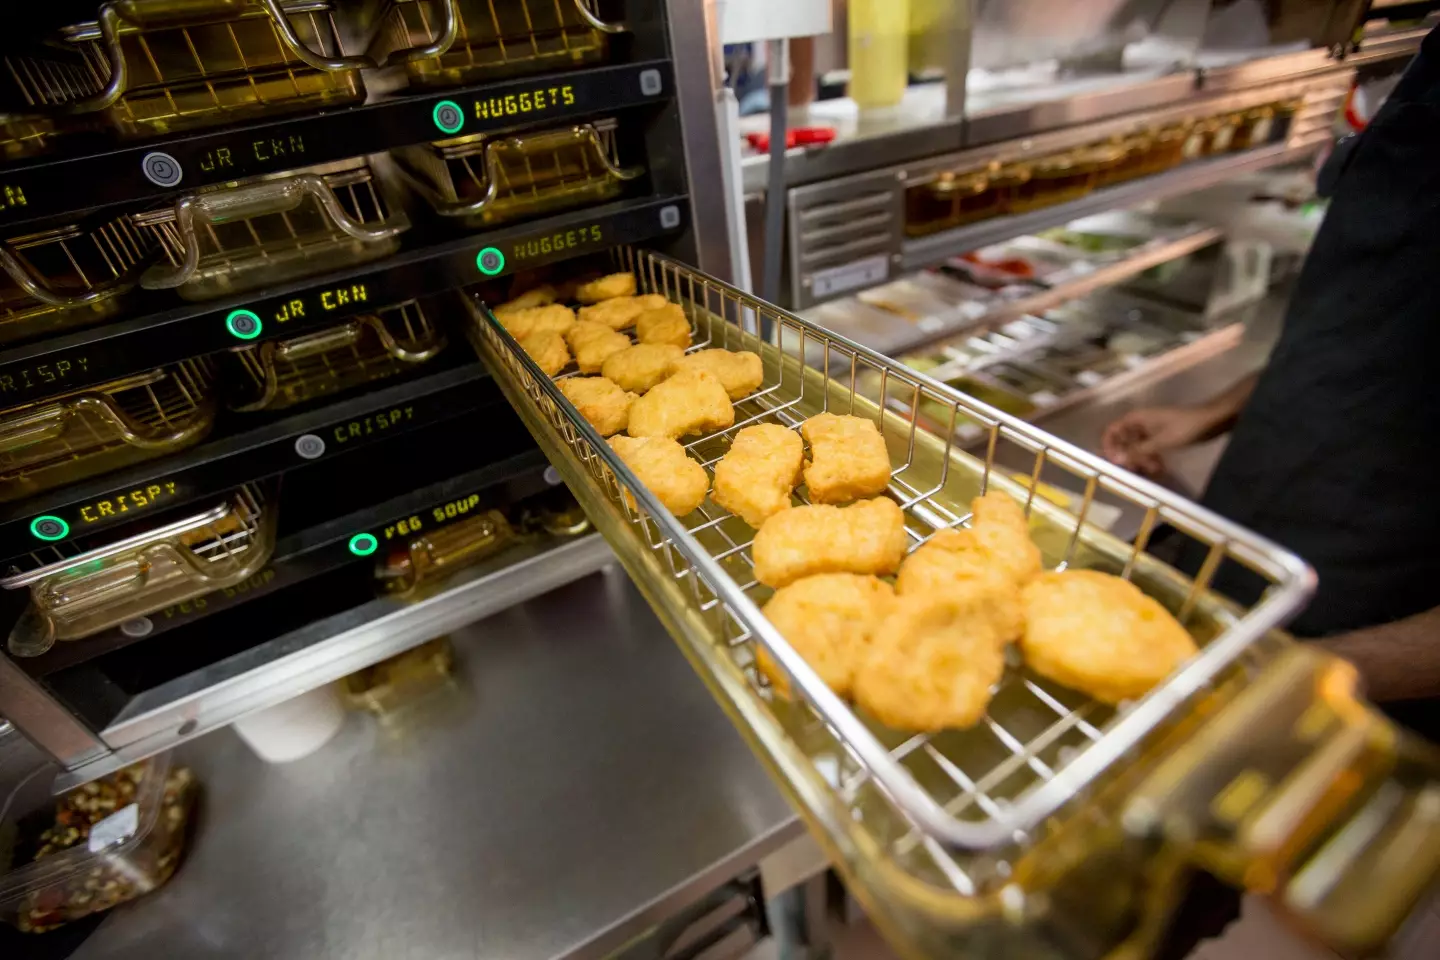 McDonalds have finally answered the prayers of chicken nugget lovers.